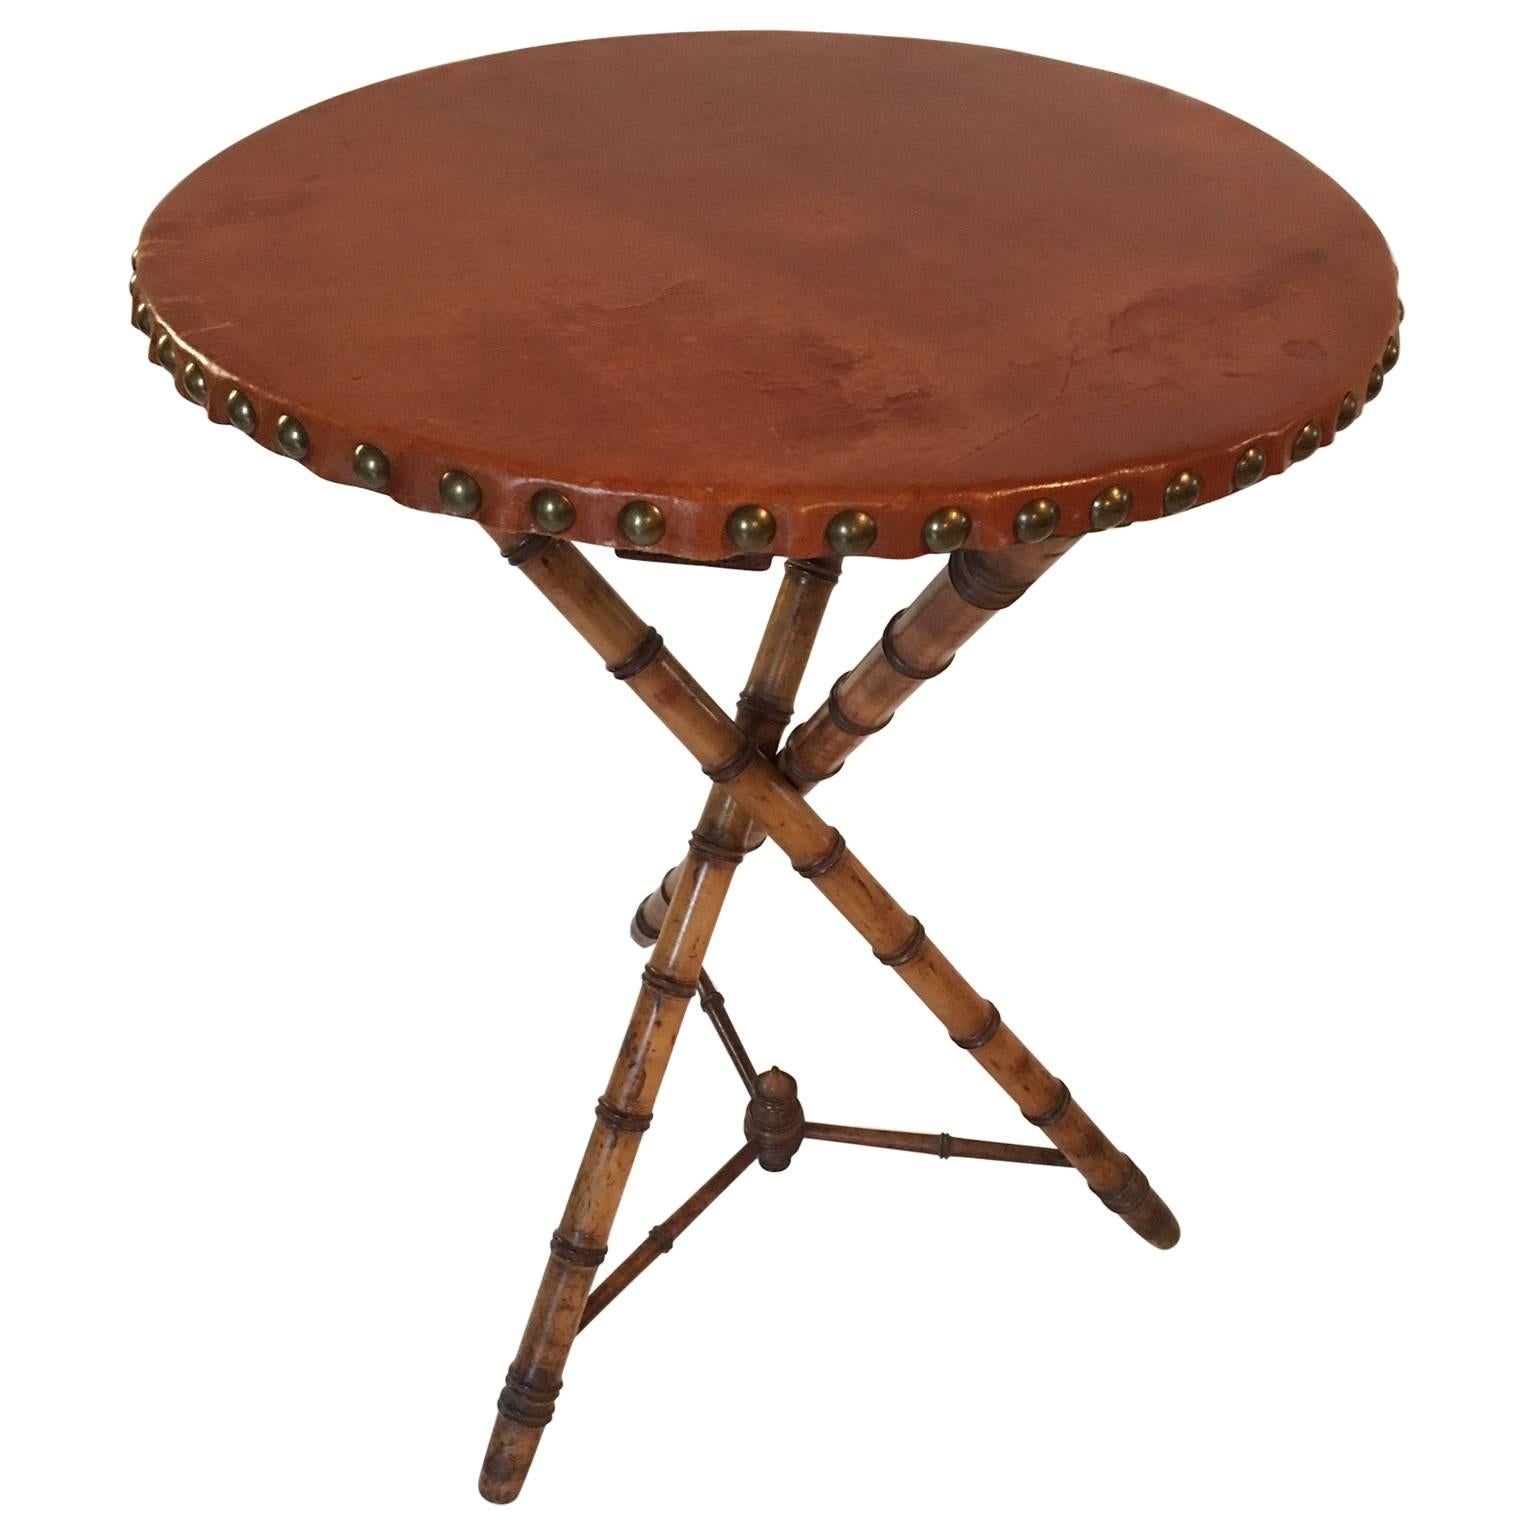 Faux Bamboo Leather Top Cricket or Side Table, circa 1870